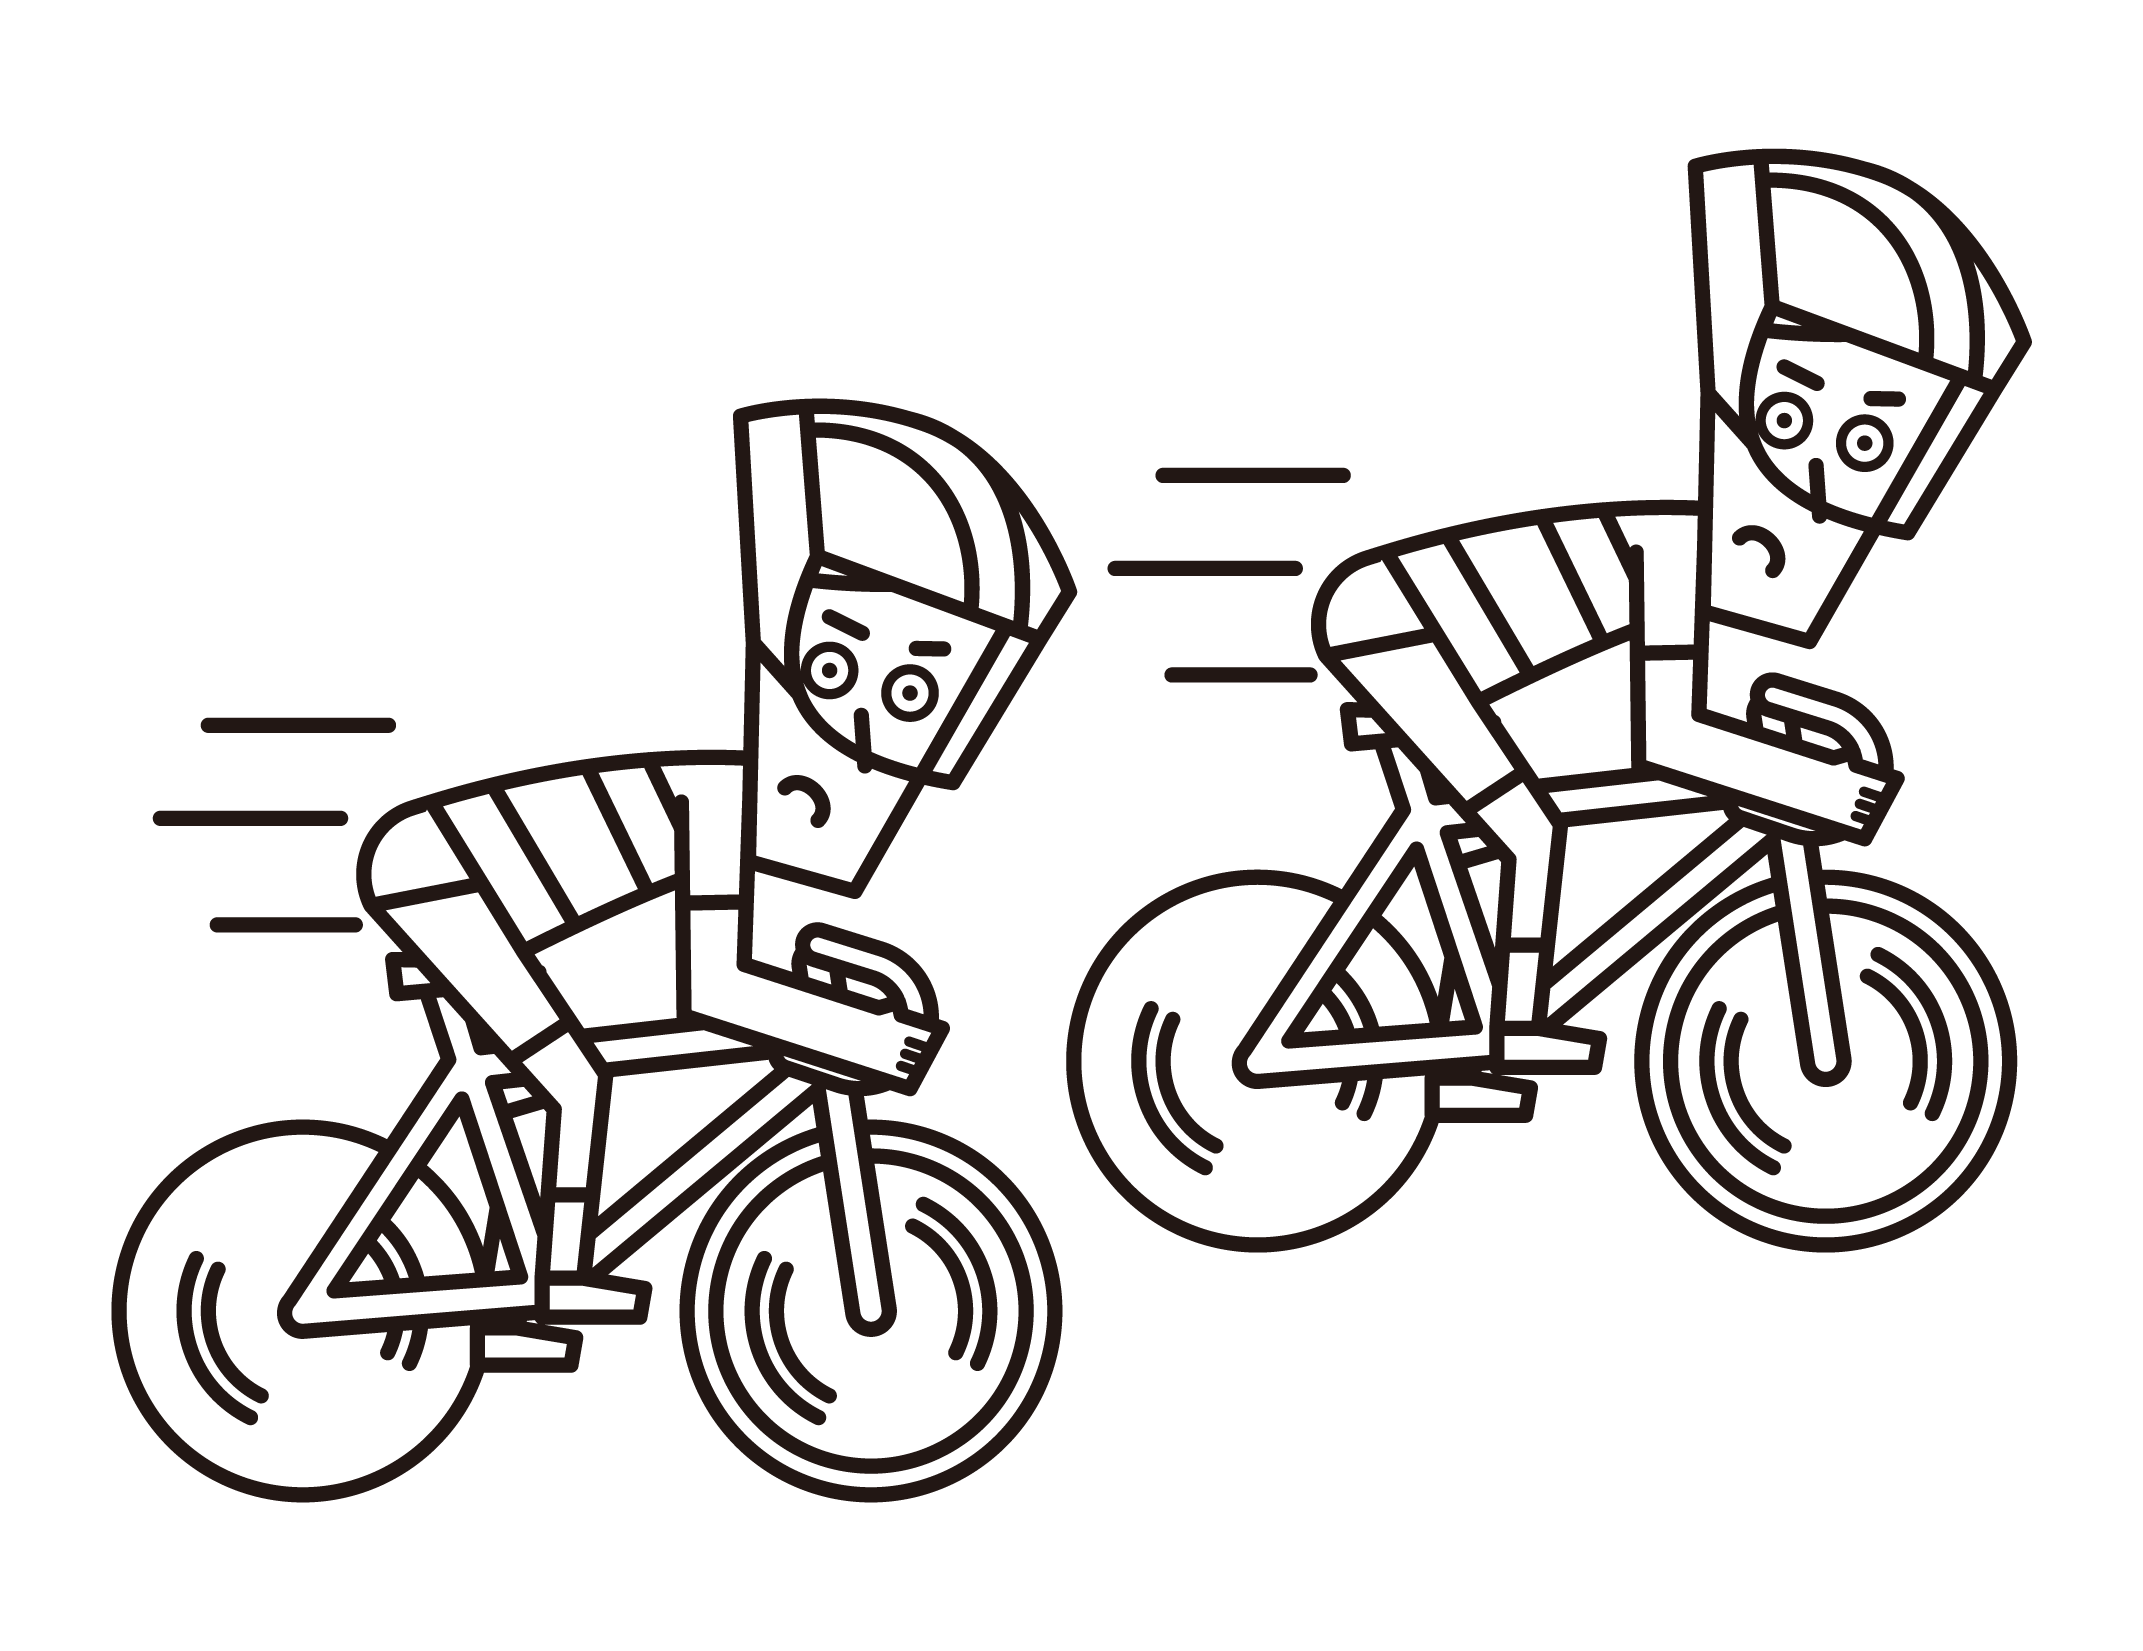 Illustration of a sprinter (male athlete in a cycling track race)